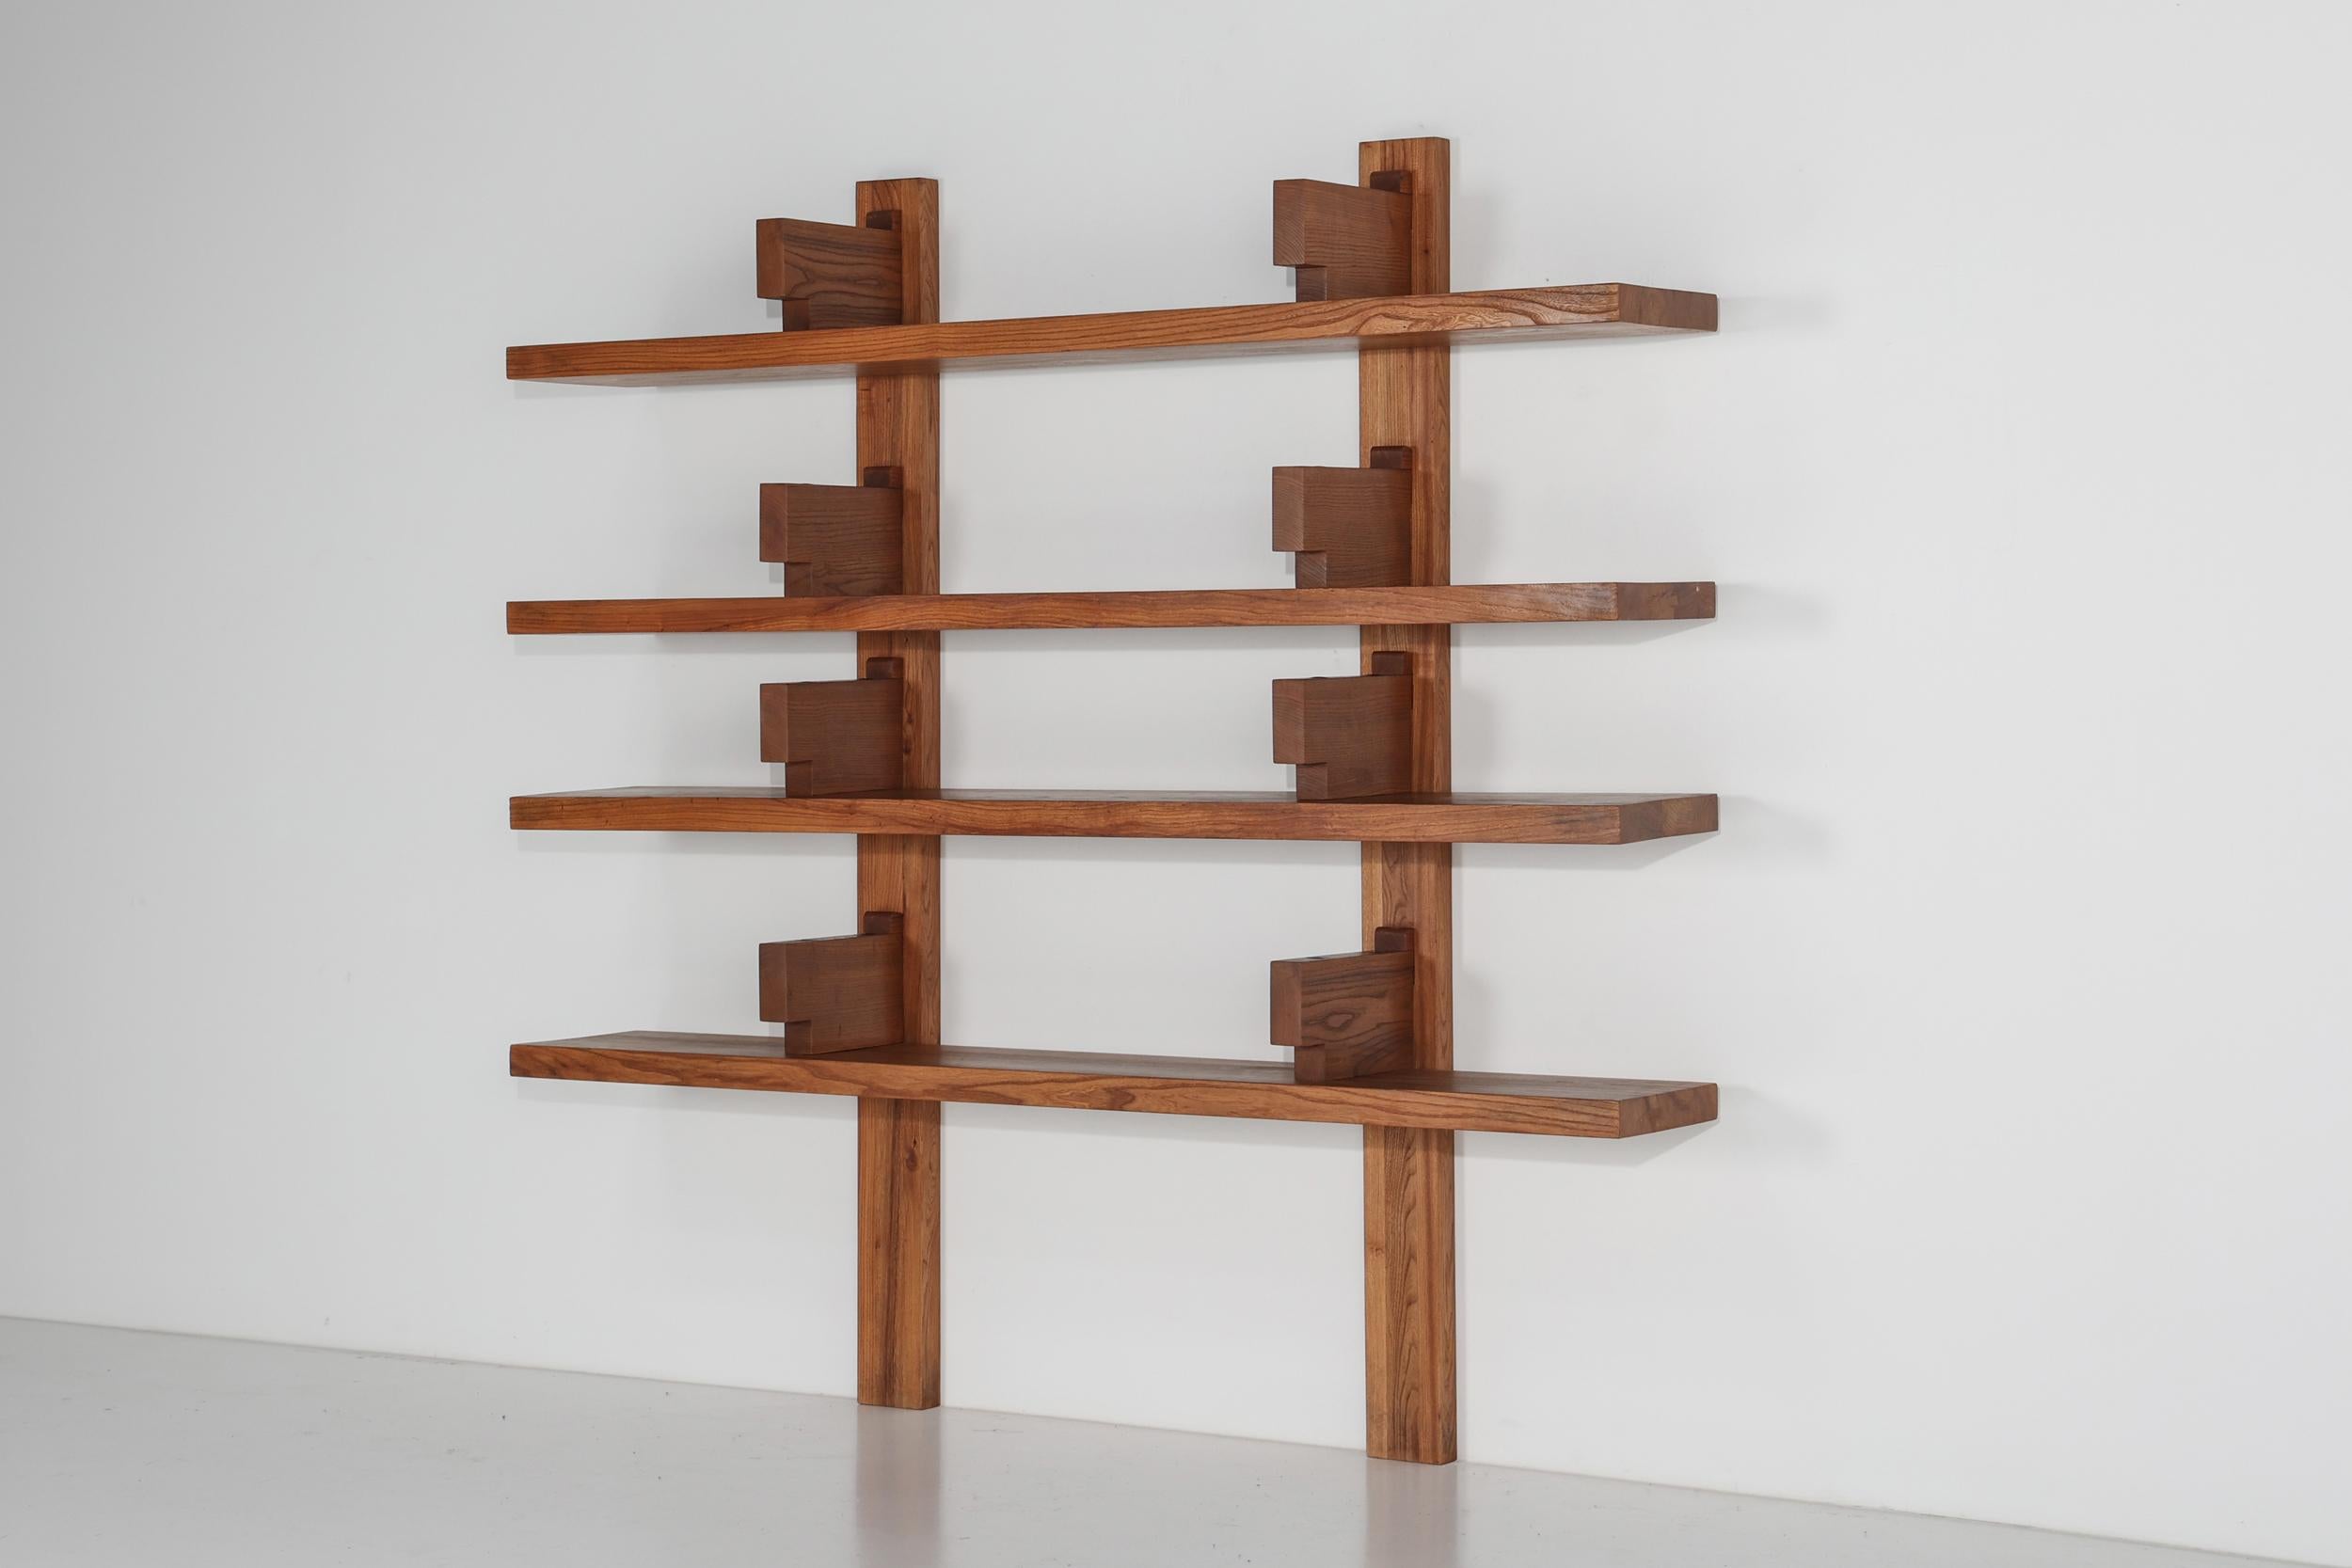 Pierre Chapo; French elm; wall unit; bookshelf; Model B17; France; 1967; 1960s Design; wood; French Design; French Craftsmanship;

This wall unit, known as model B17, was created by French designer Pierre Chapo in the 1960s. It's a bookshelf made